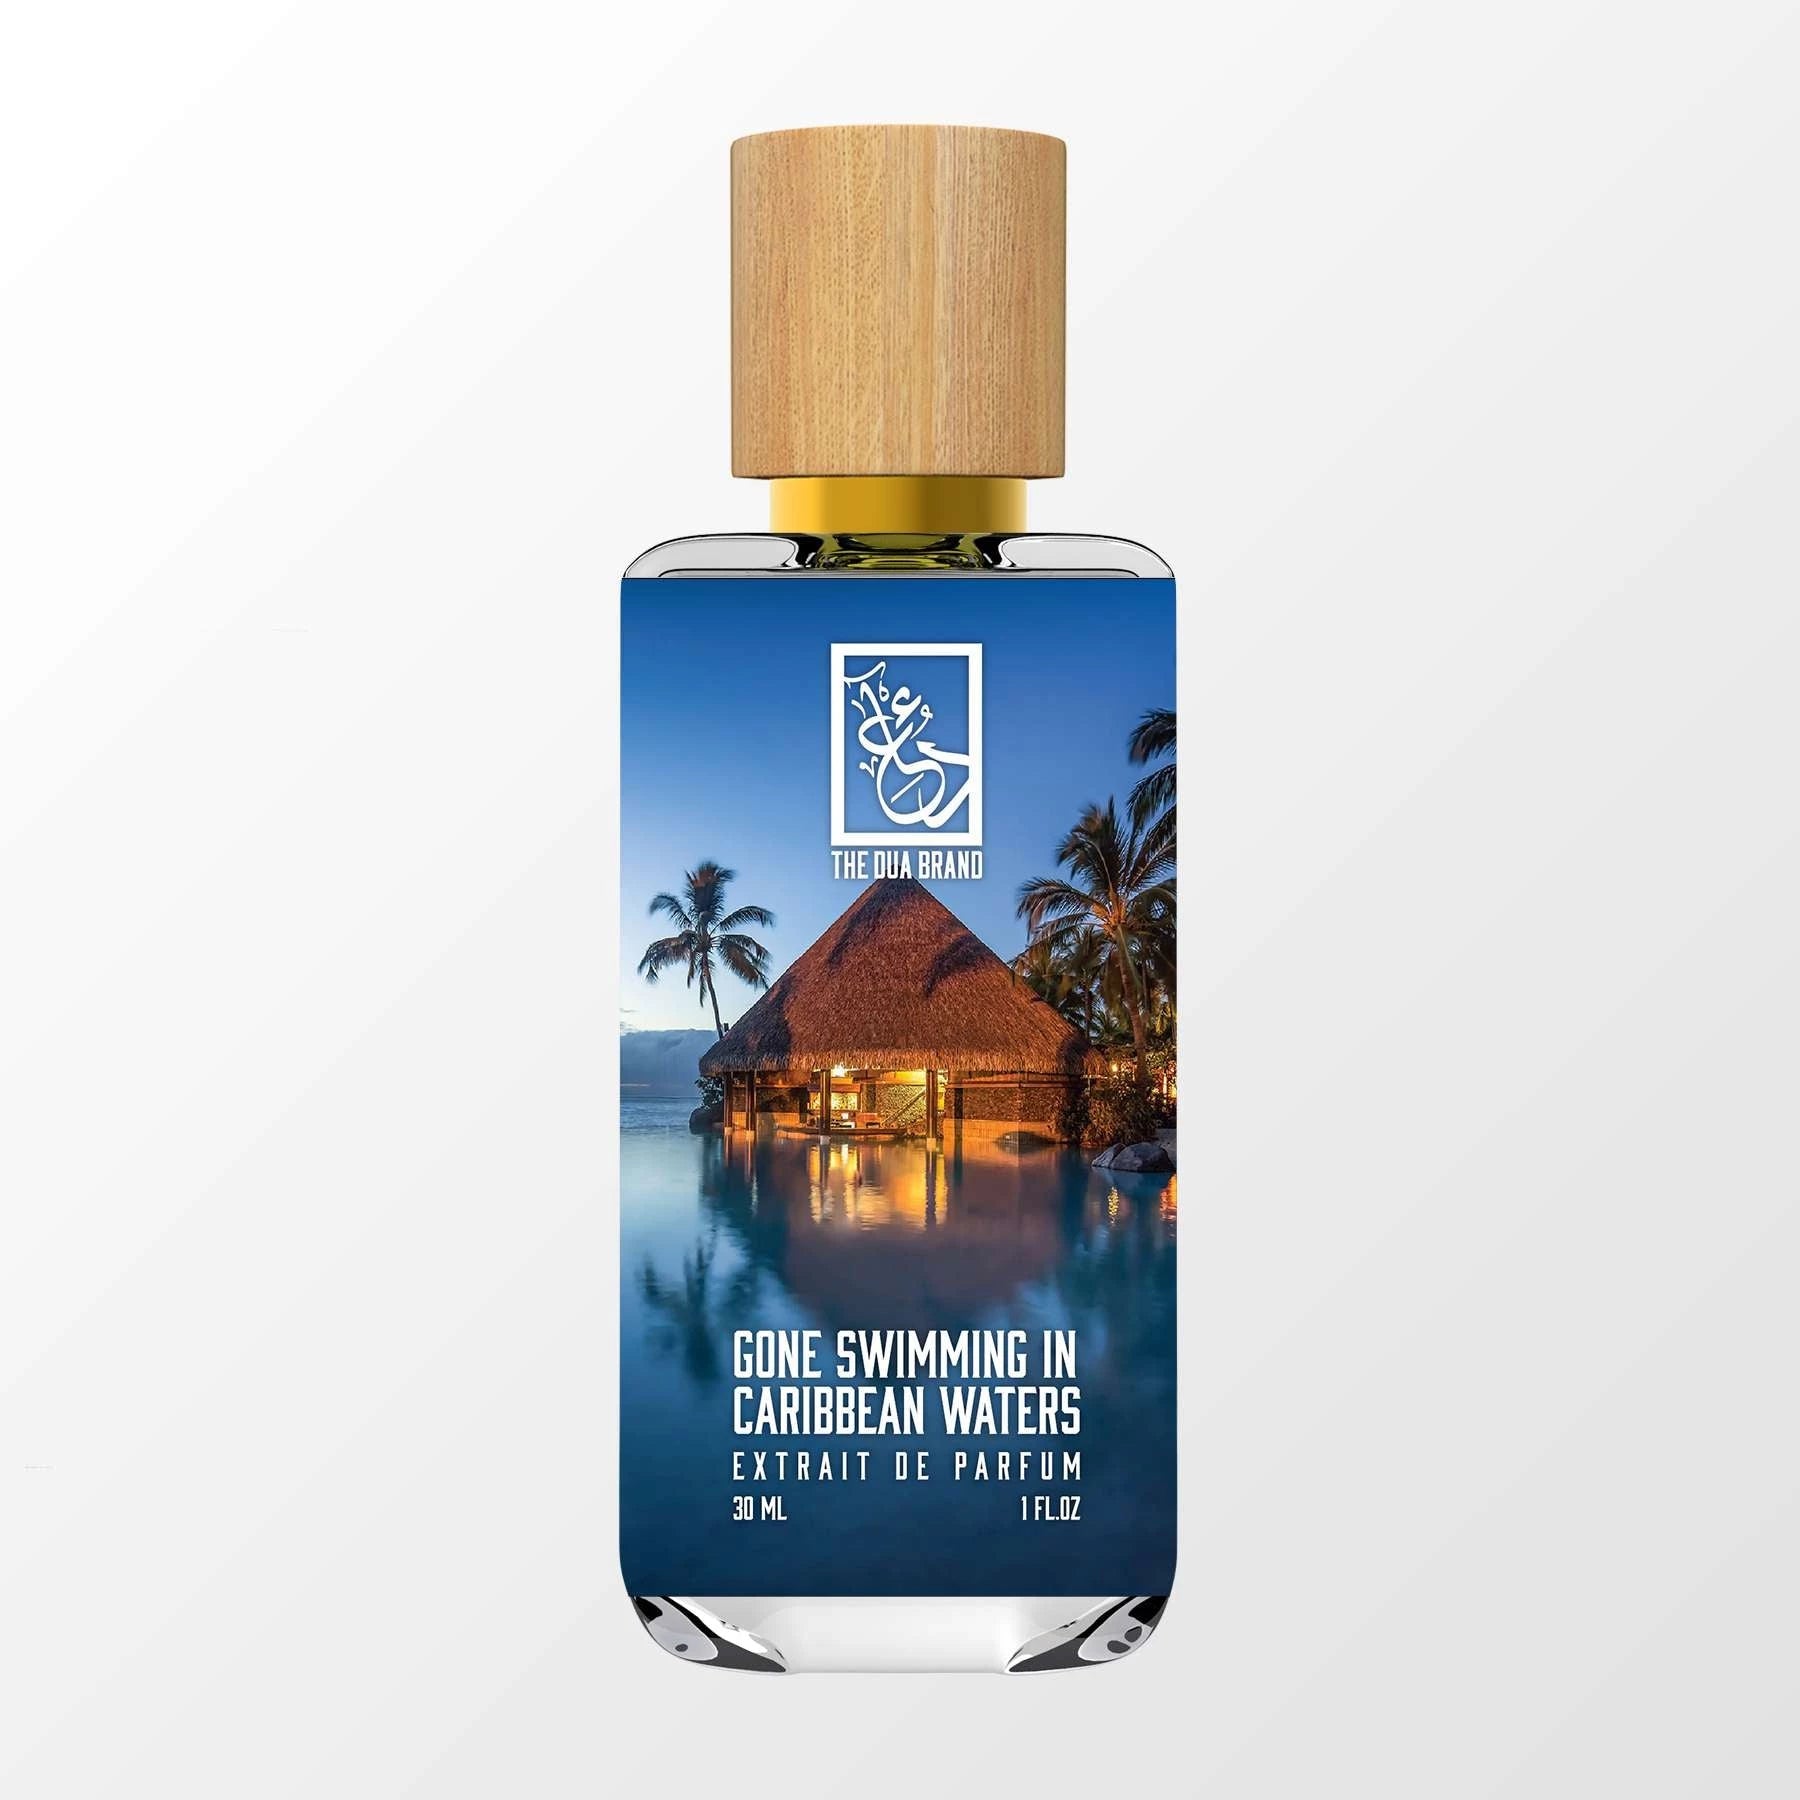 LOUIS VUITTON ON THE BEACH FRAGRANCE REVIEW  HOW DOES IT COMPARE TO  AFTERNOON SWIM? 